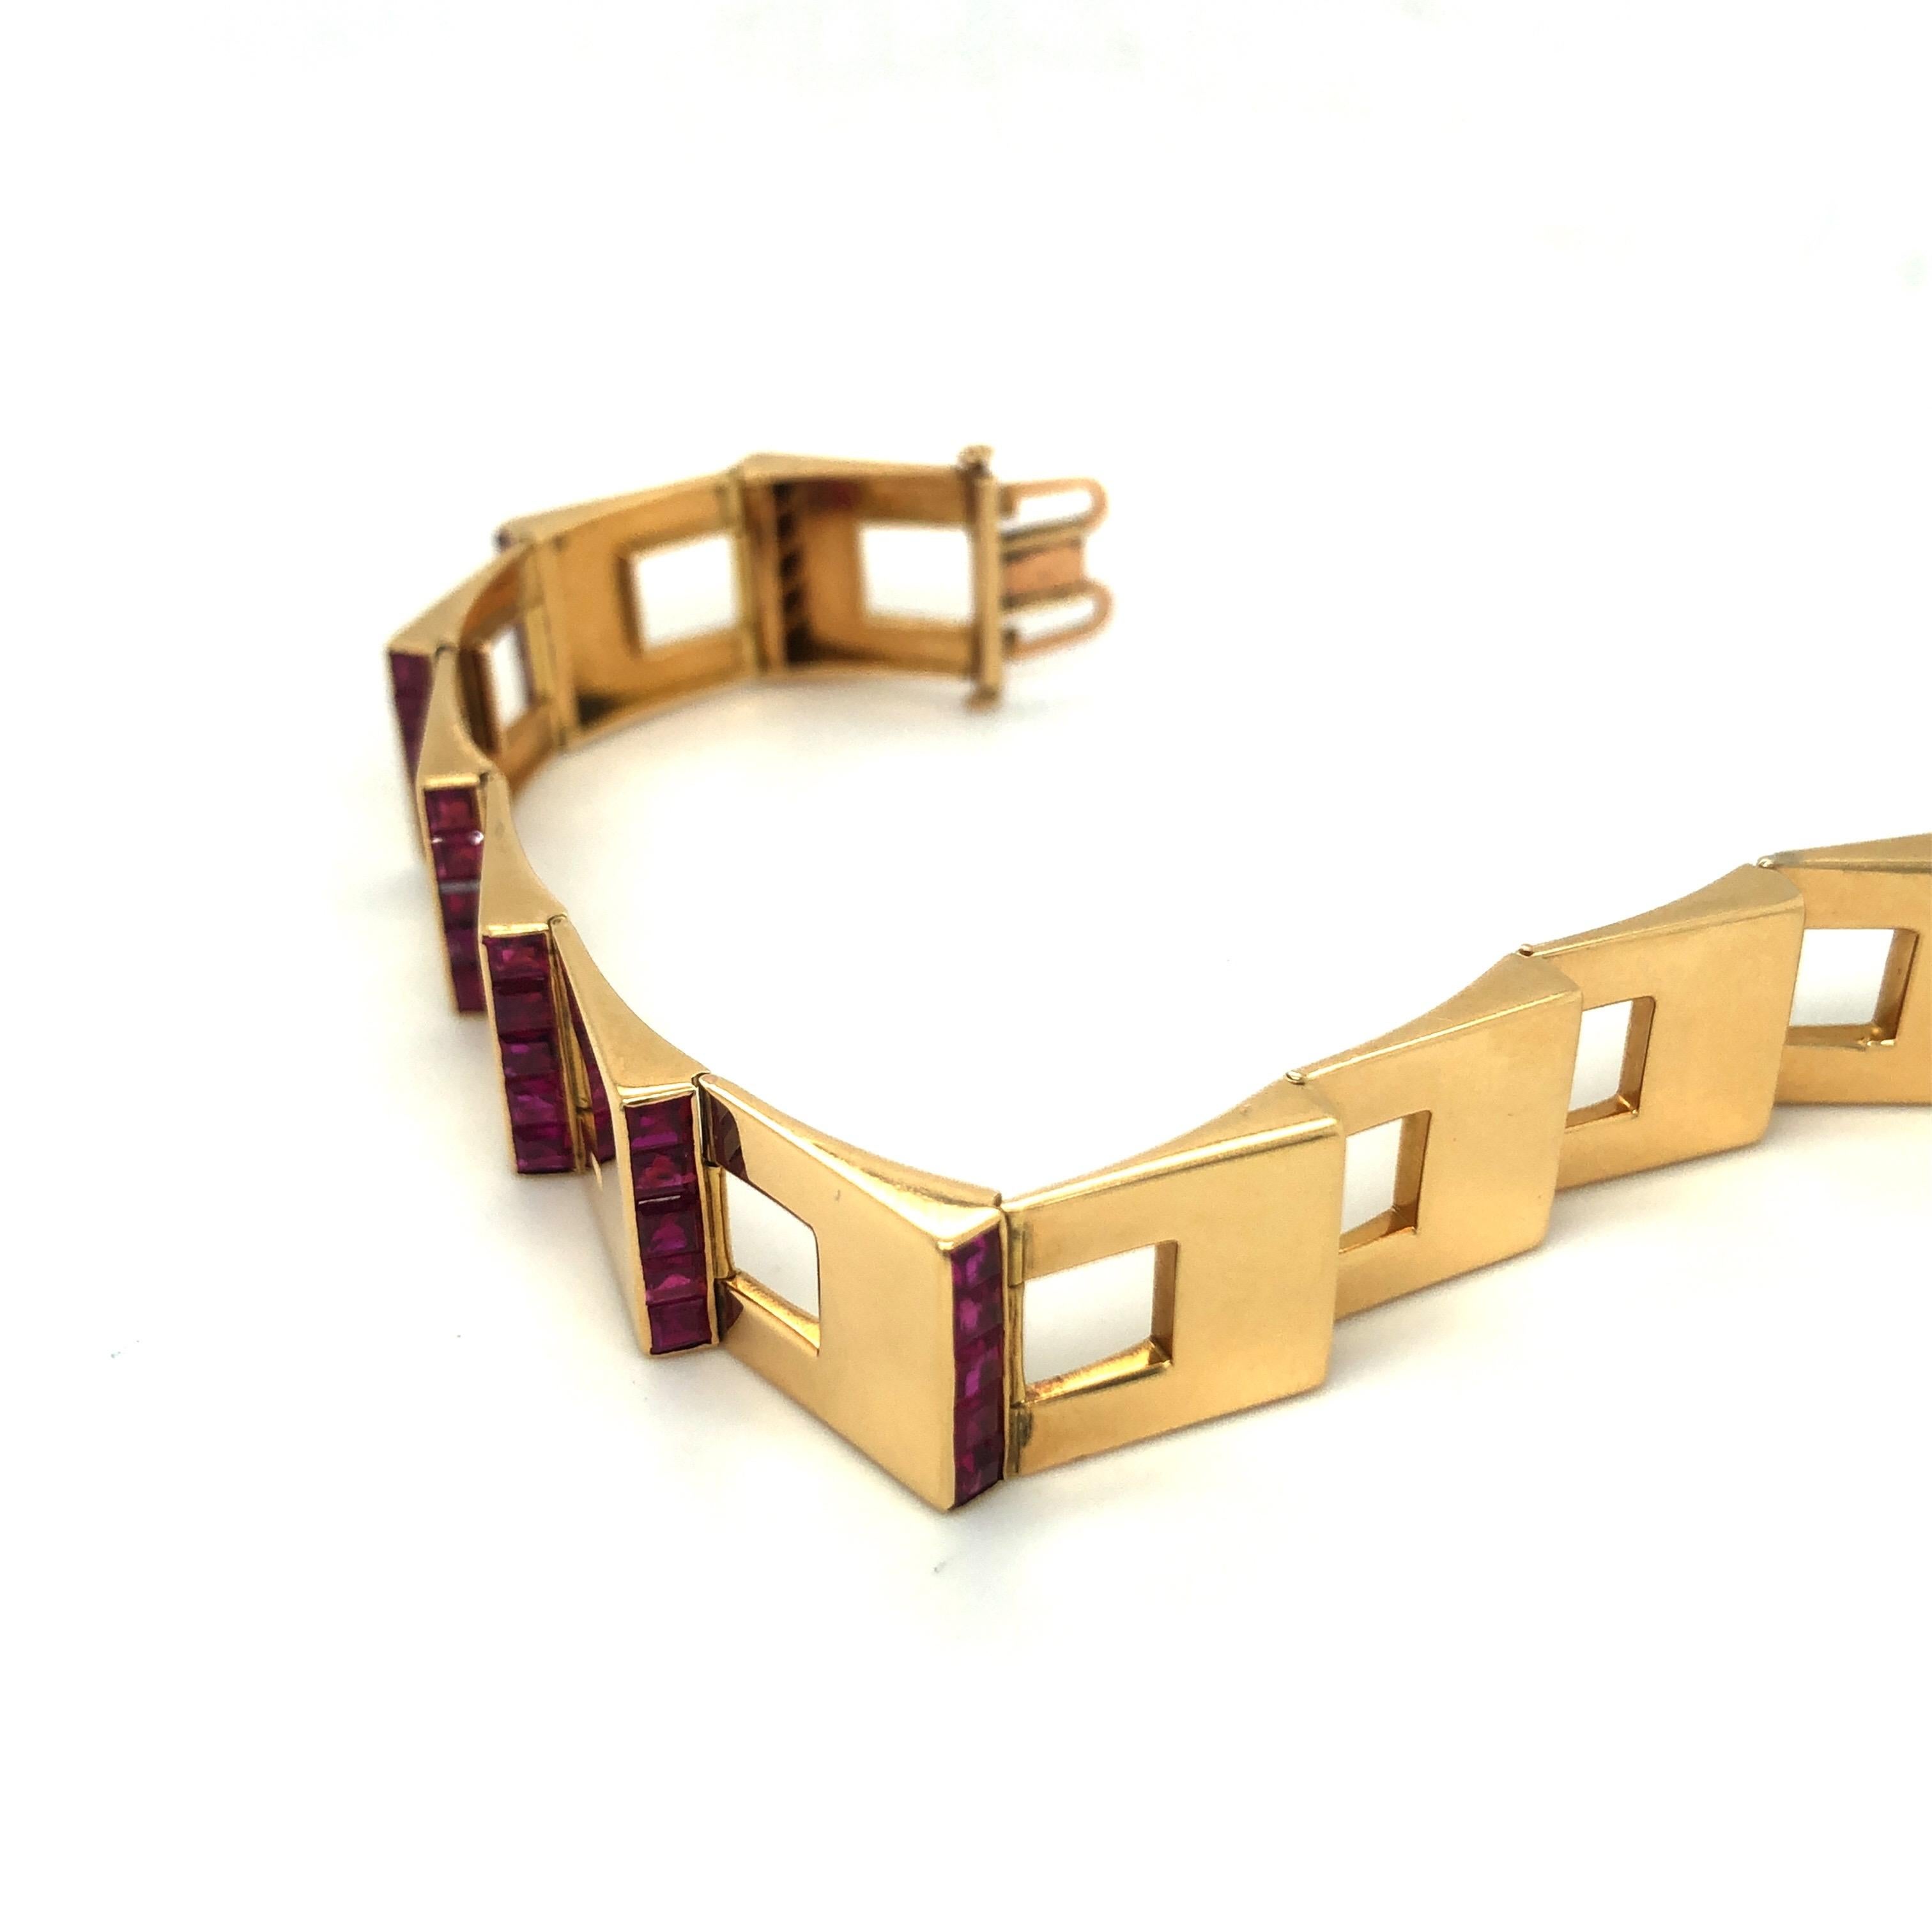 Rare Cartier London Burma rubies and rose gold retro escalier bracelet, crafted in 18 karat rose gold and set with 55 carré-cut unheated Burma rubies.
Consisting of 11 articulated rectangular prism links, this bracelet gives the effect of a moving